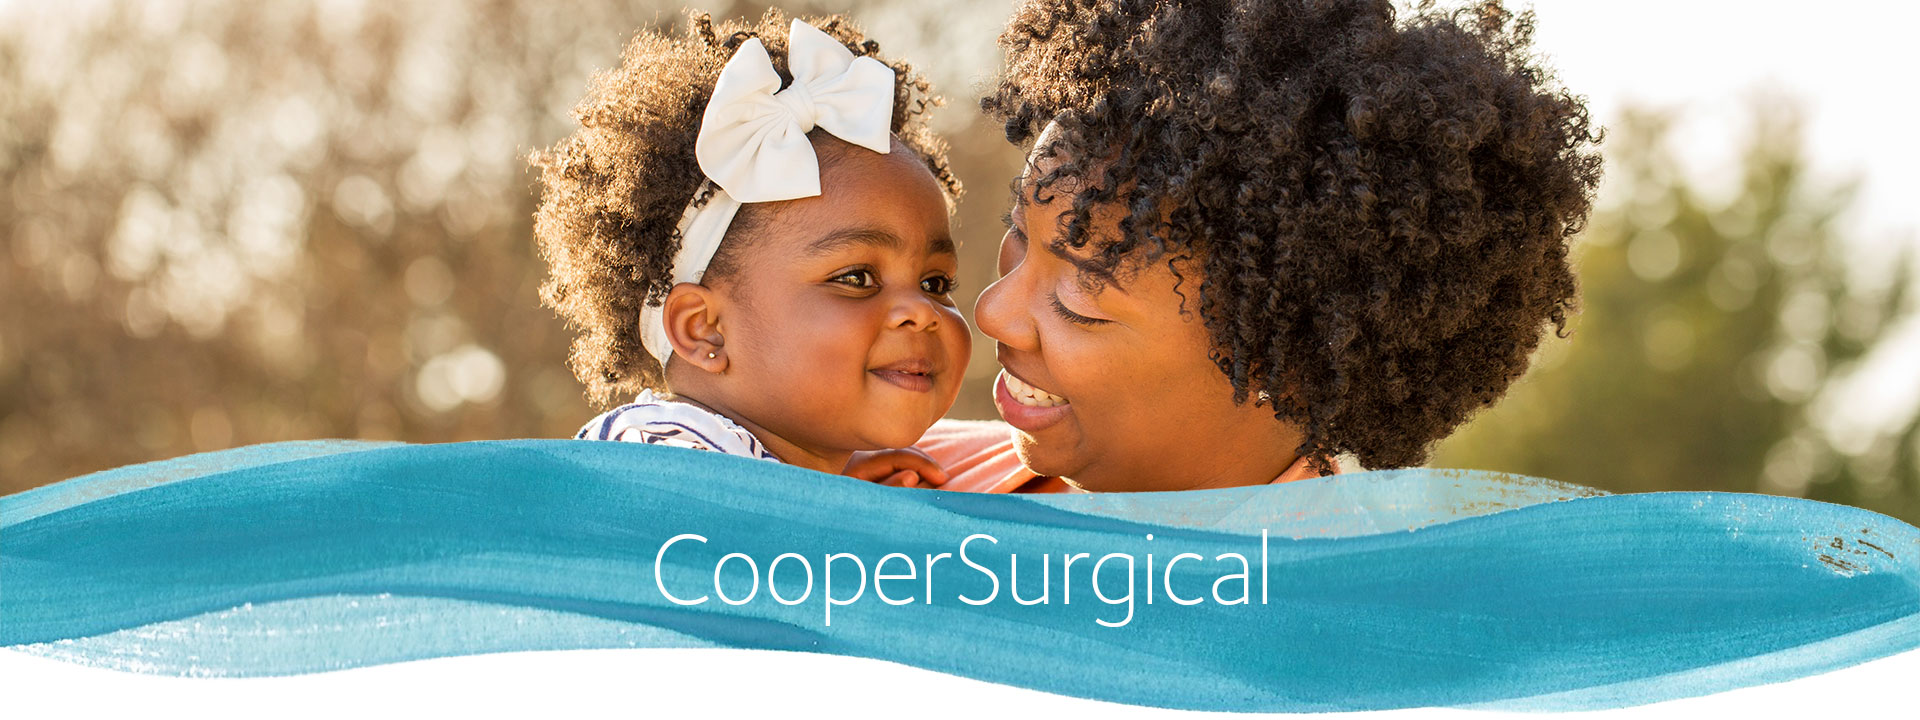 coopersurgical